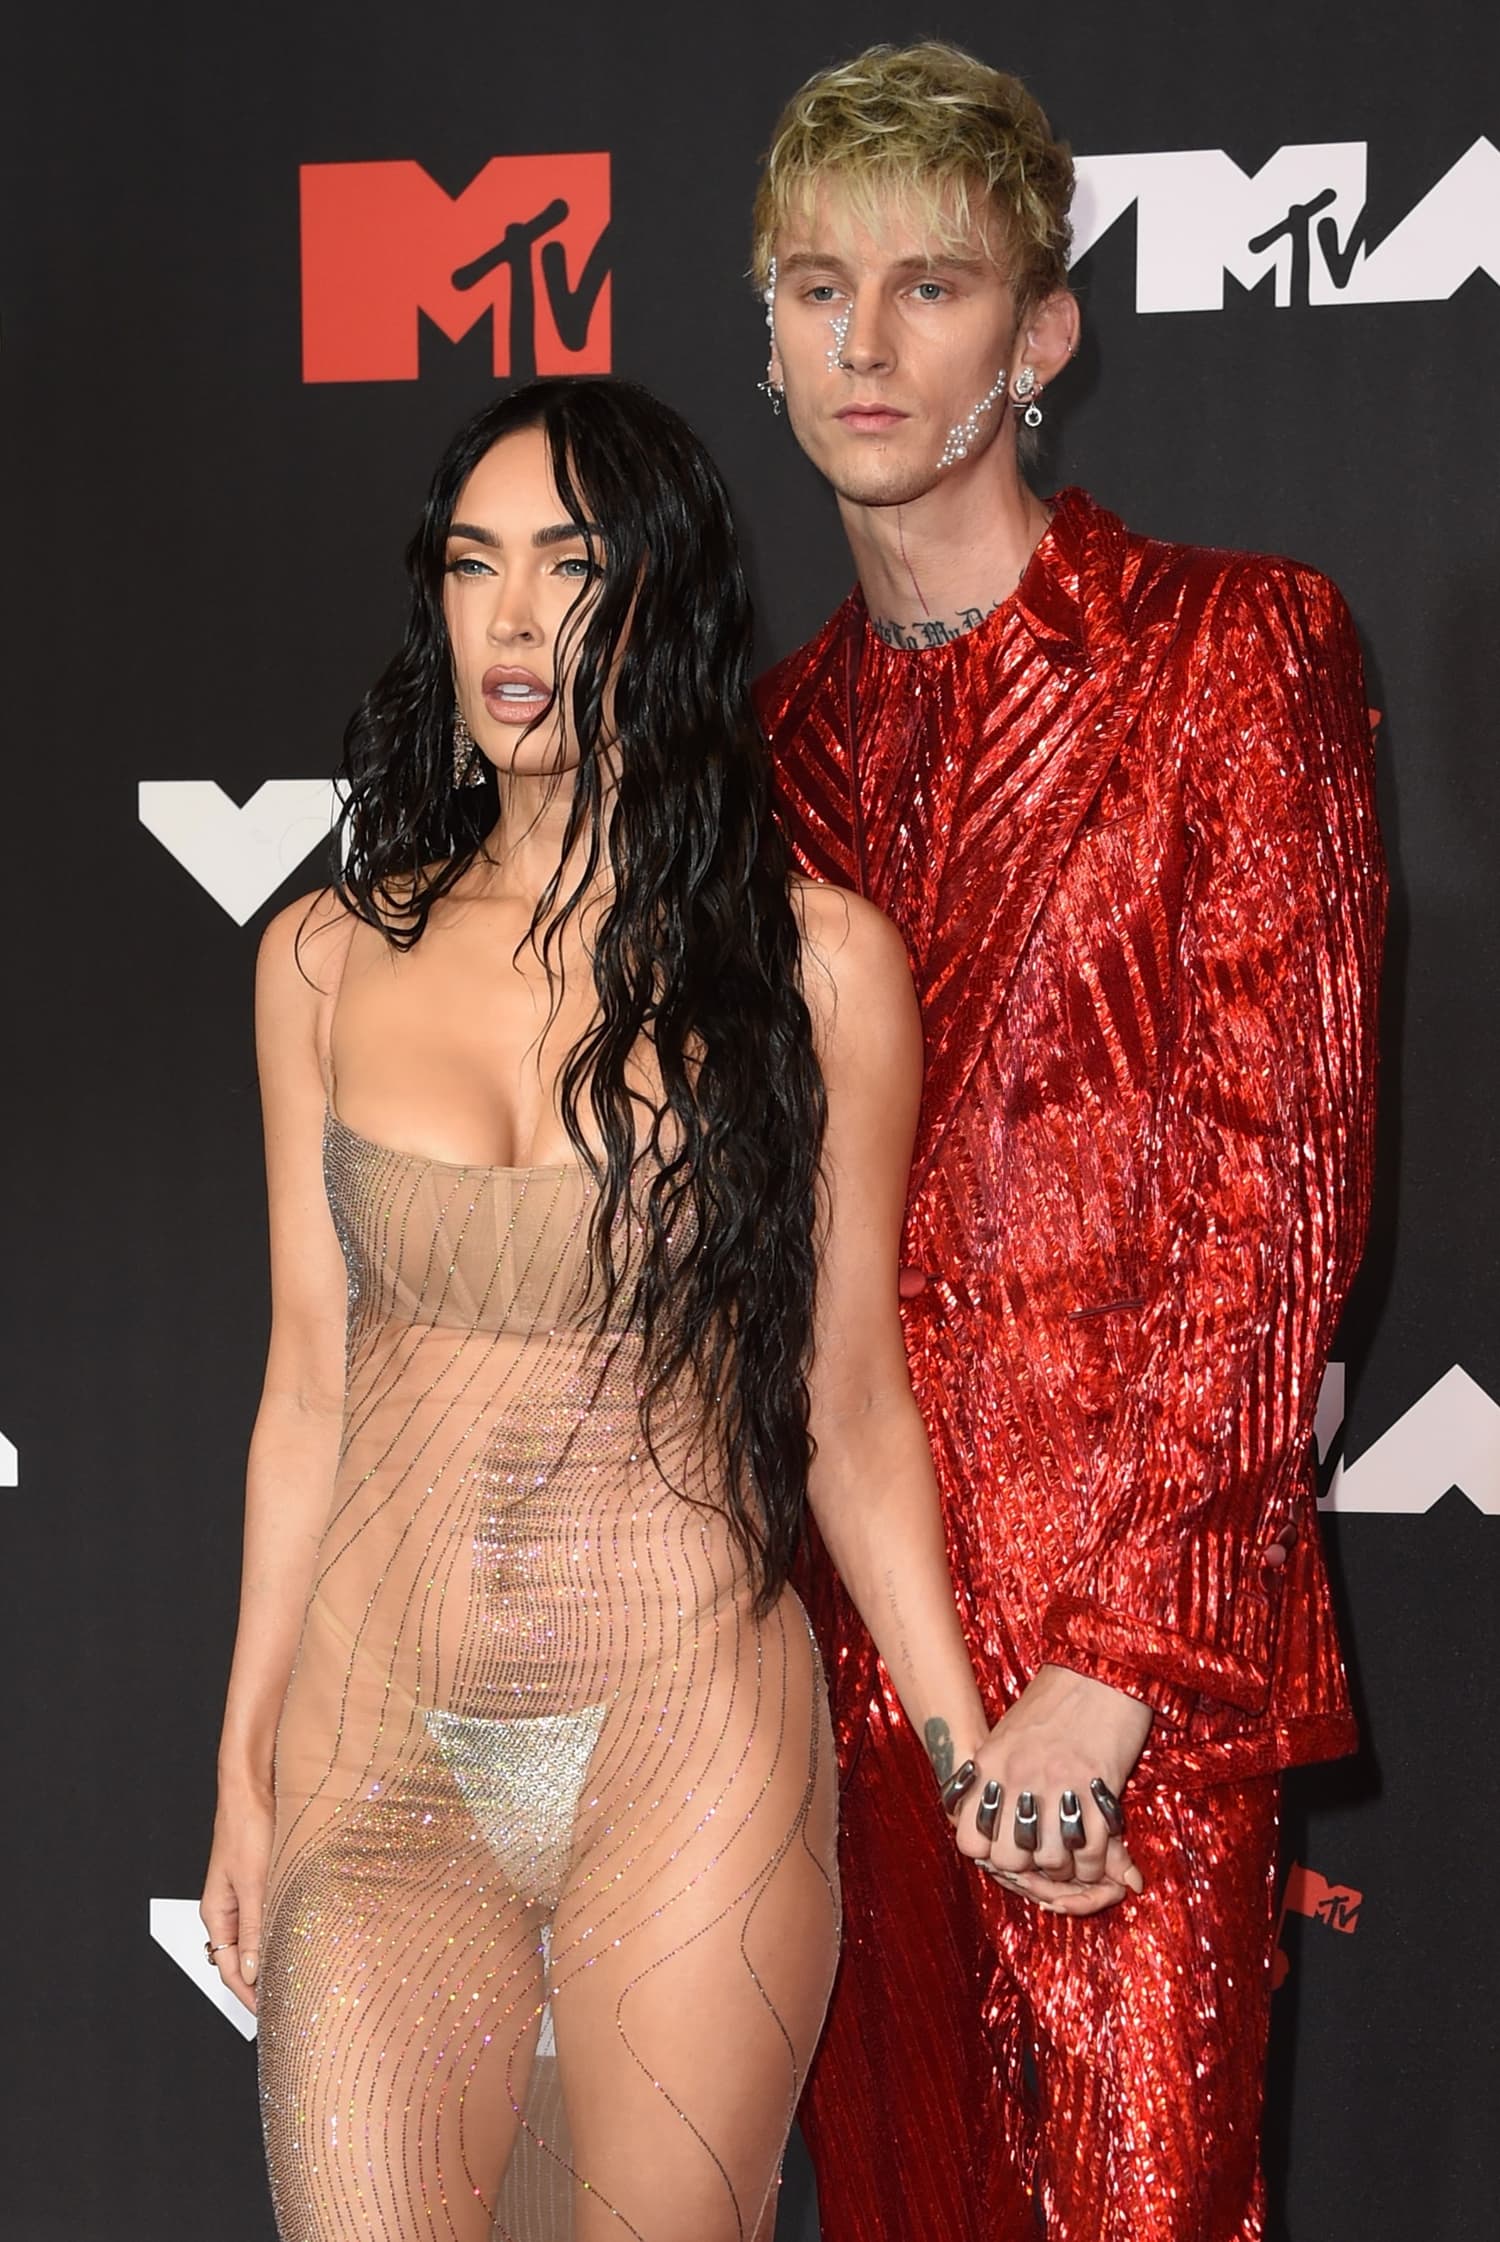 Megan Fox and Machine Gun Kelly announced their engagement in January 2022 after over a year of dating